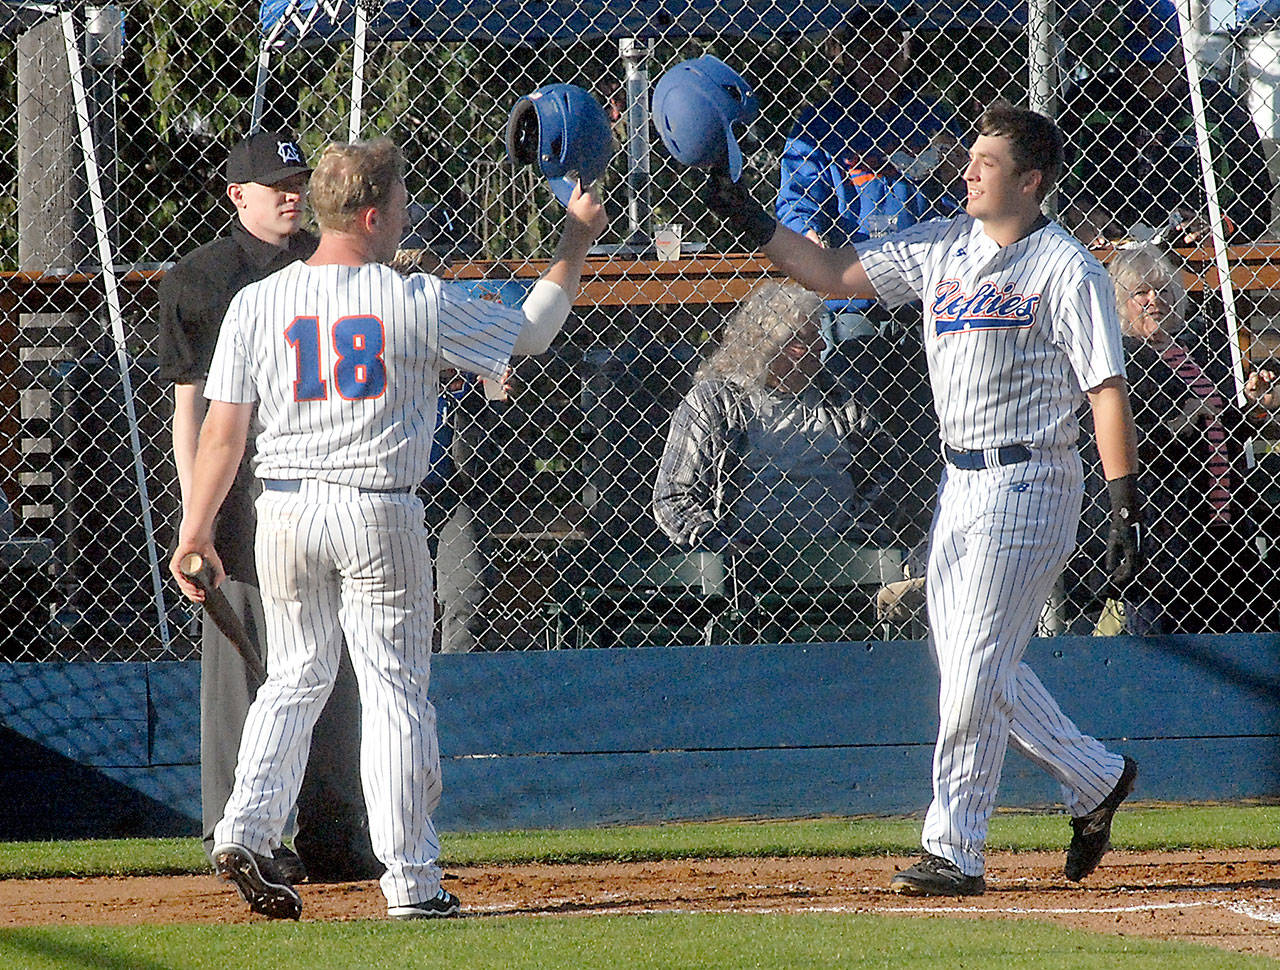 Lefties third baseman Evan Hurn, right, is greeted by fellow baserunner Zander Marco at home plate after Hurn’s two-run homer in the second inning Friday night at Port Angeles Civic Field. (Keith Thorpe/Peninsula Daily News)